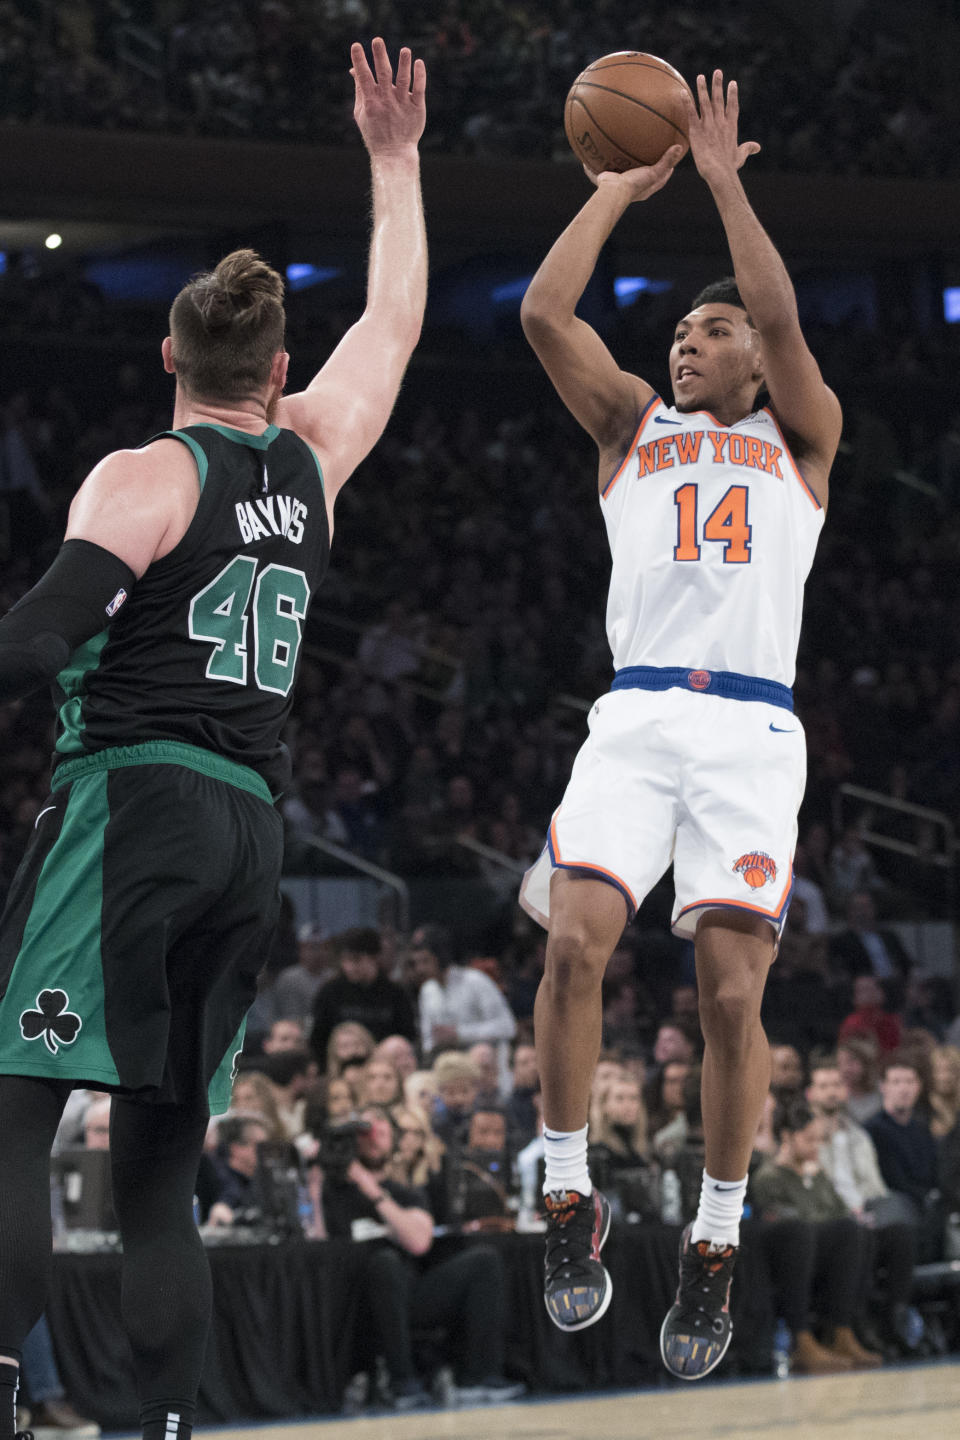 New York Knicks guard Allonzo Trier (14) shoots a 3-point goal past Boston Celtics center Aron Baynes (46) during the first half of an NBA basketball game Friday, Feb. 1, 2019, at Madison Square Garden in New York. (AP Photo/Mary Altaffer)